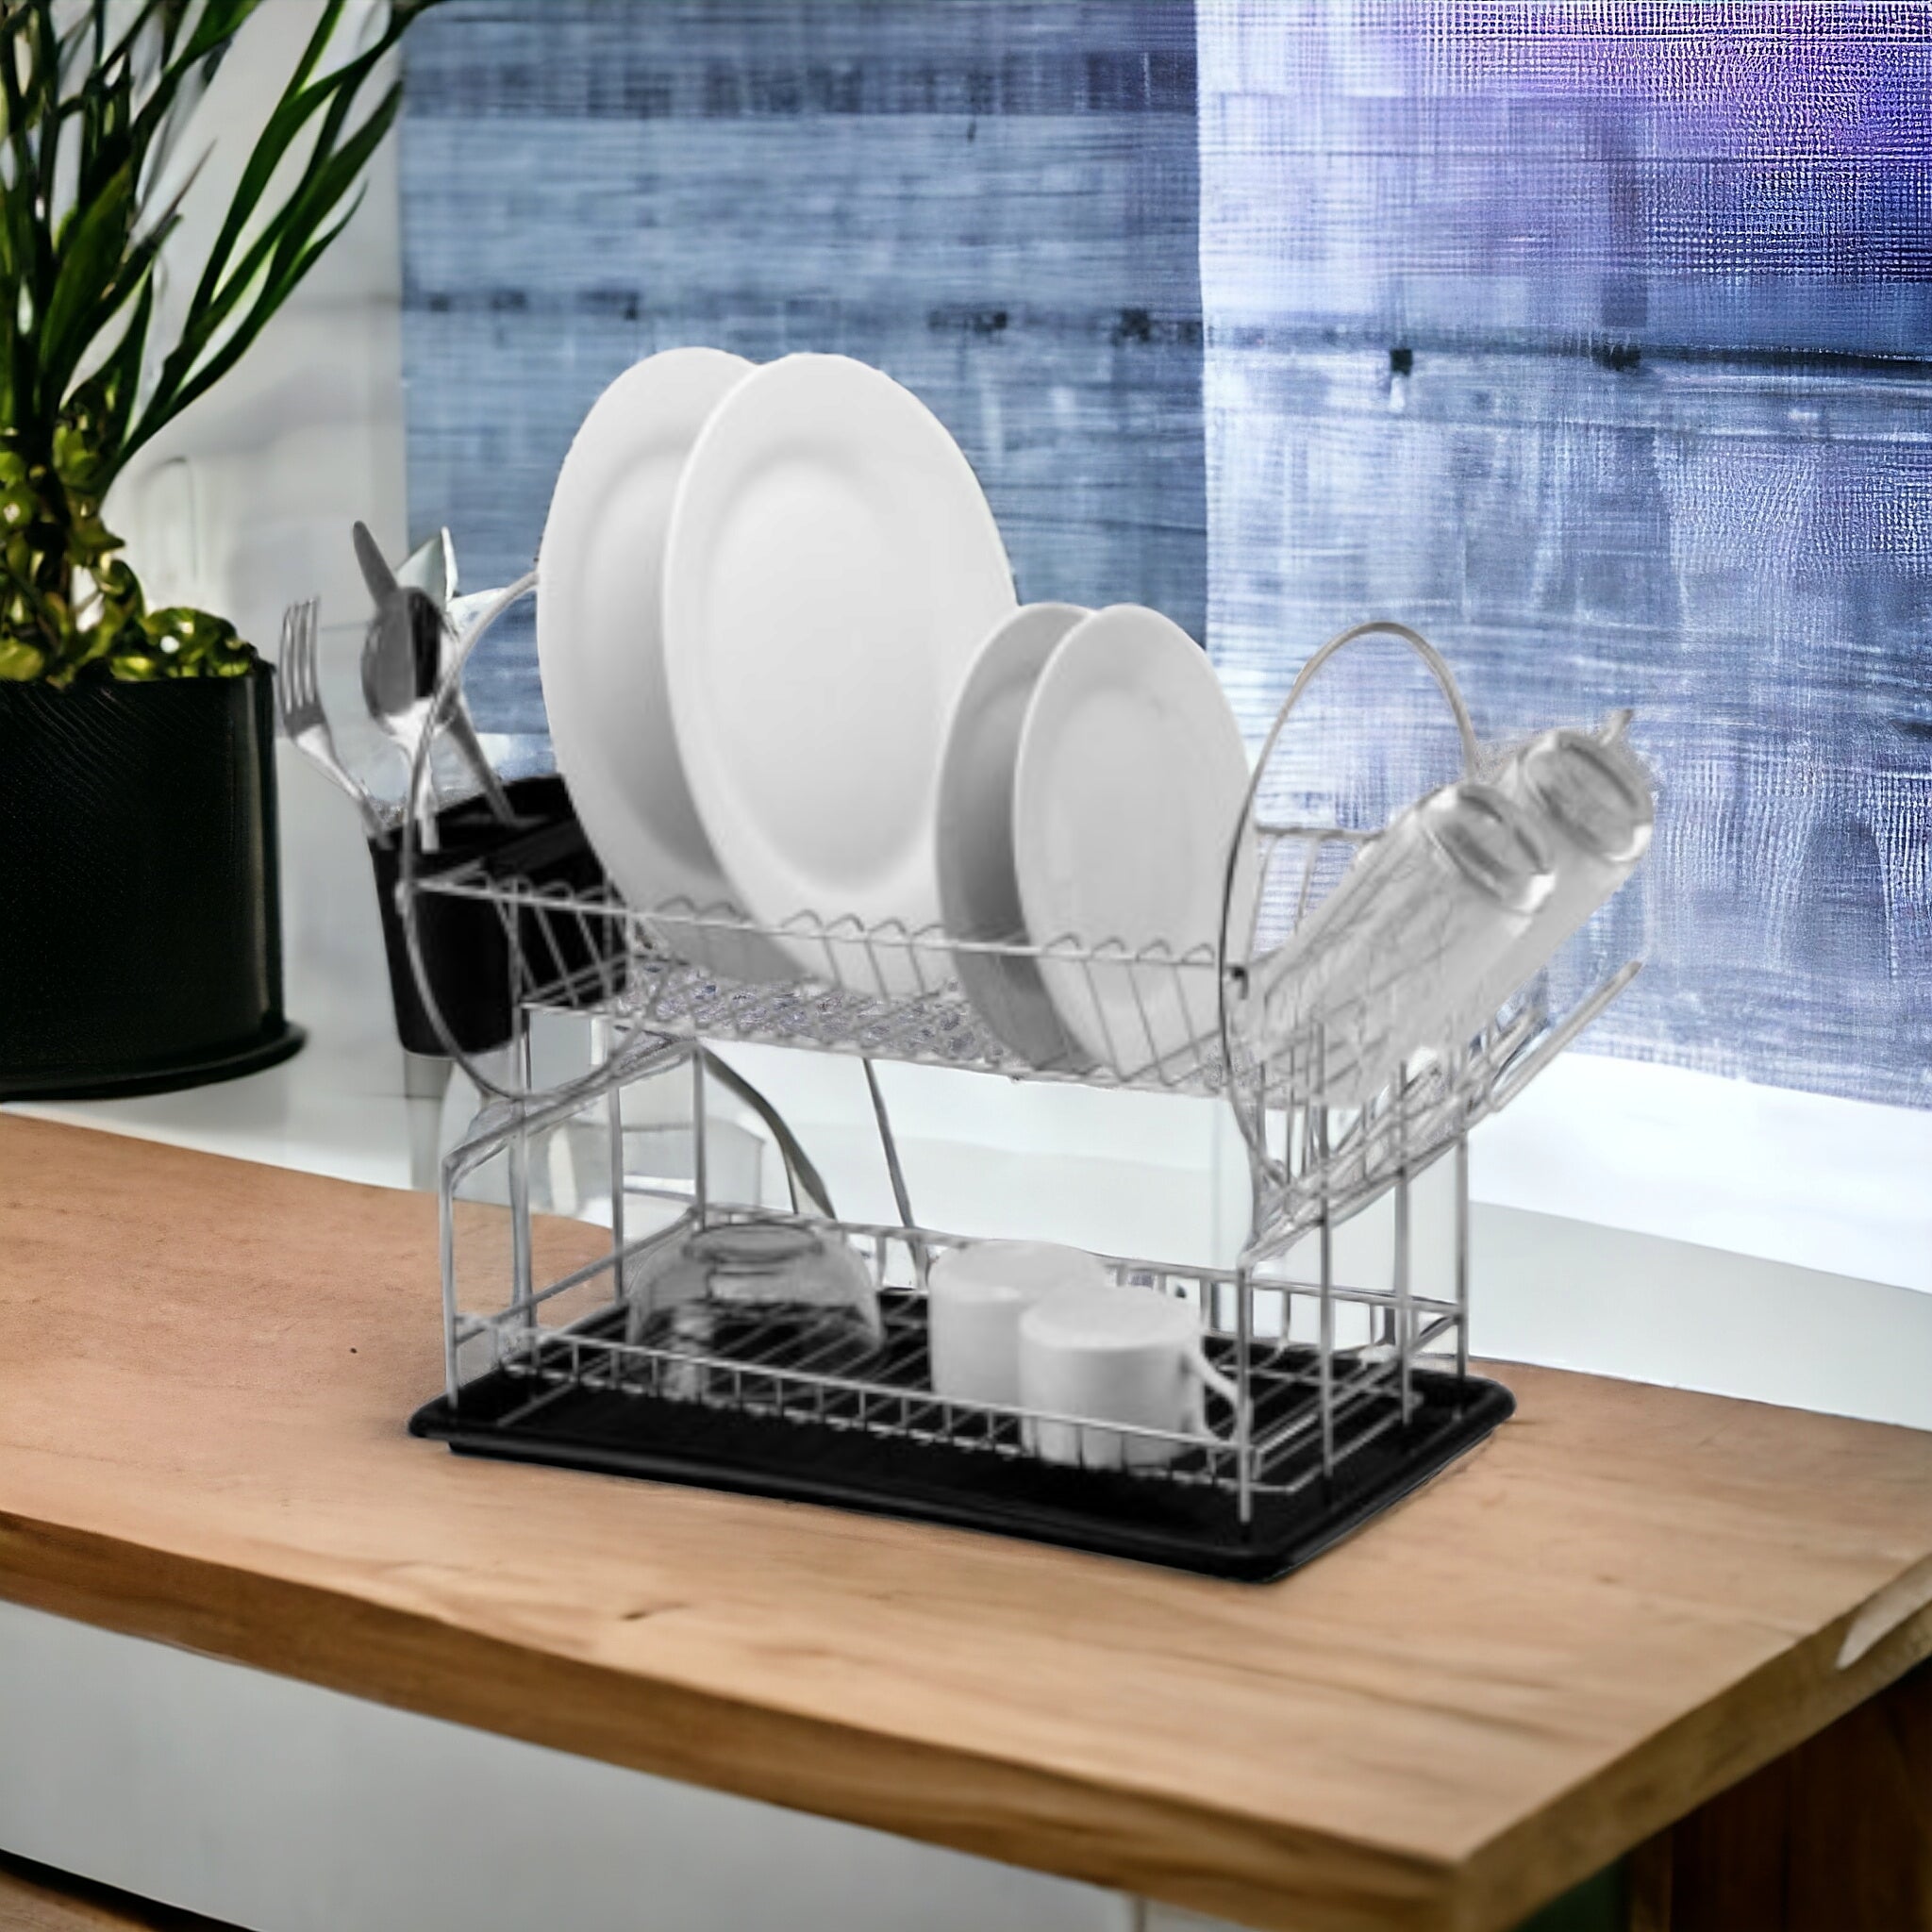 2-Tier Stainless Steel Dish Rack 42cm Chrome Plated with Black Tray